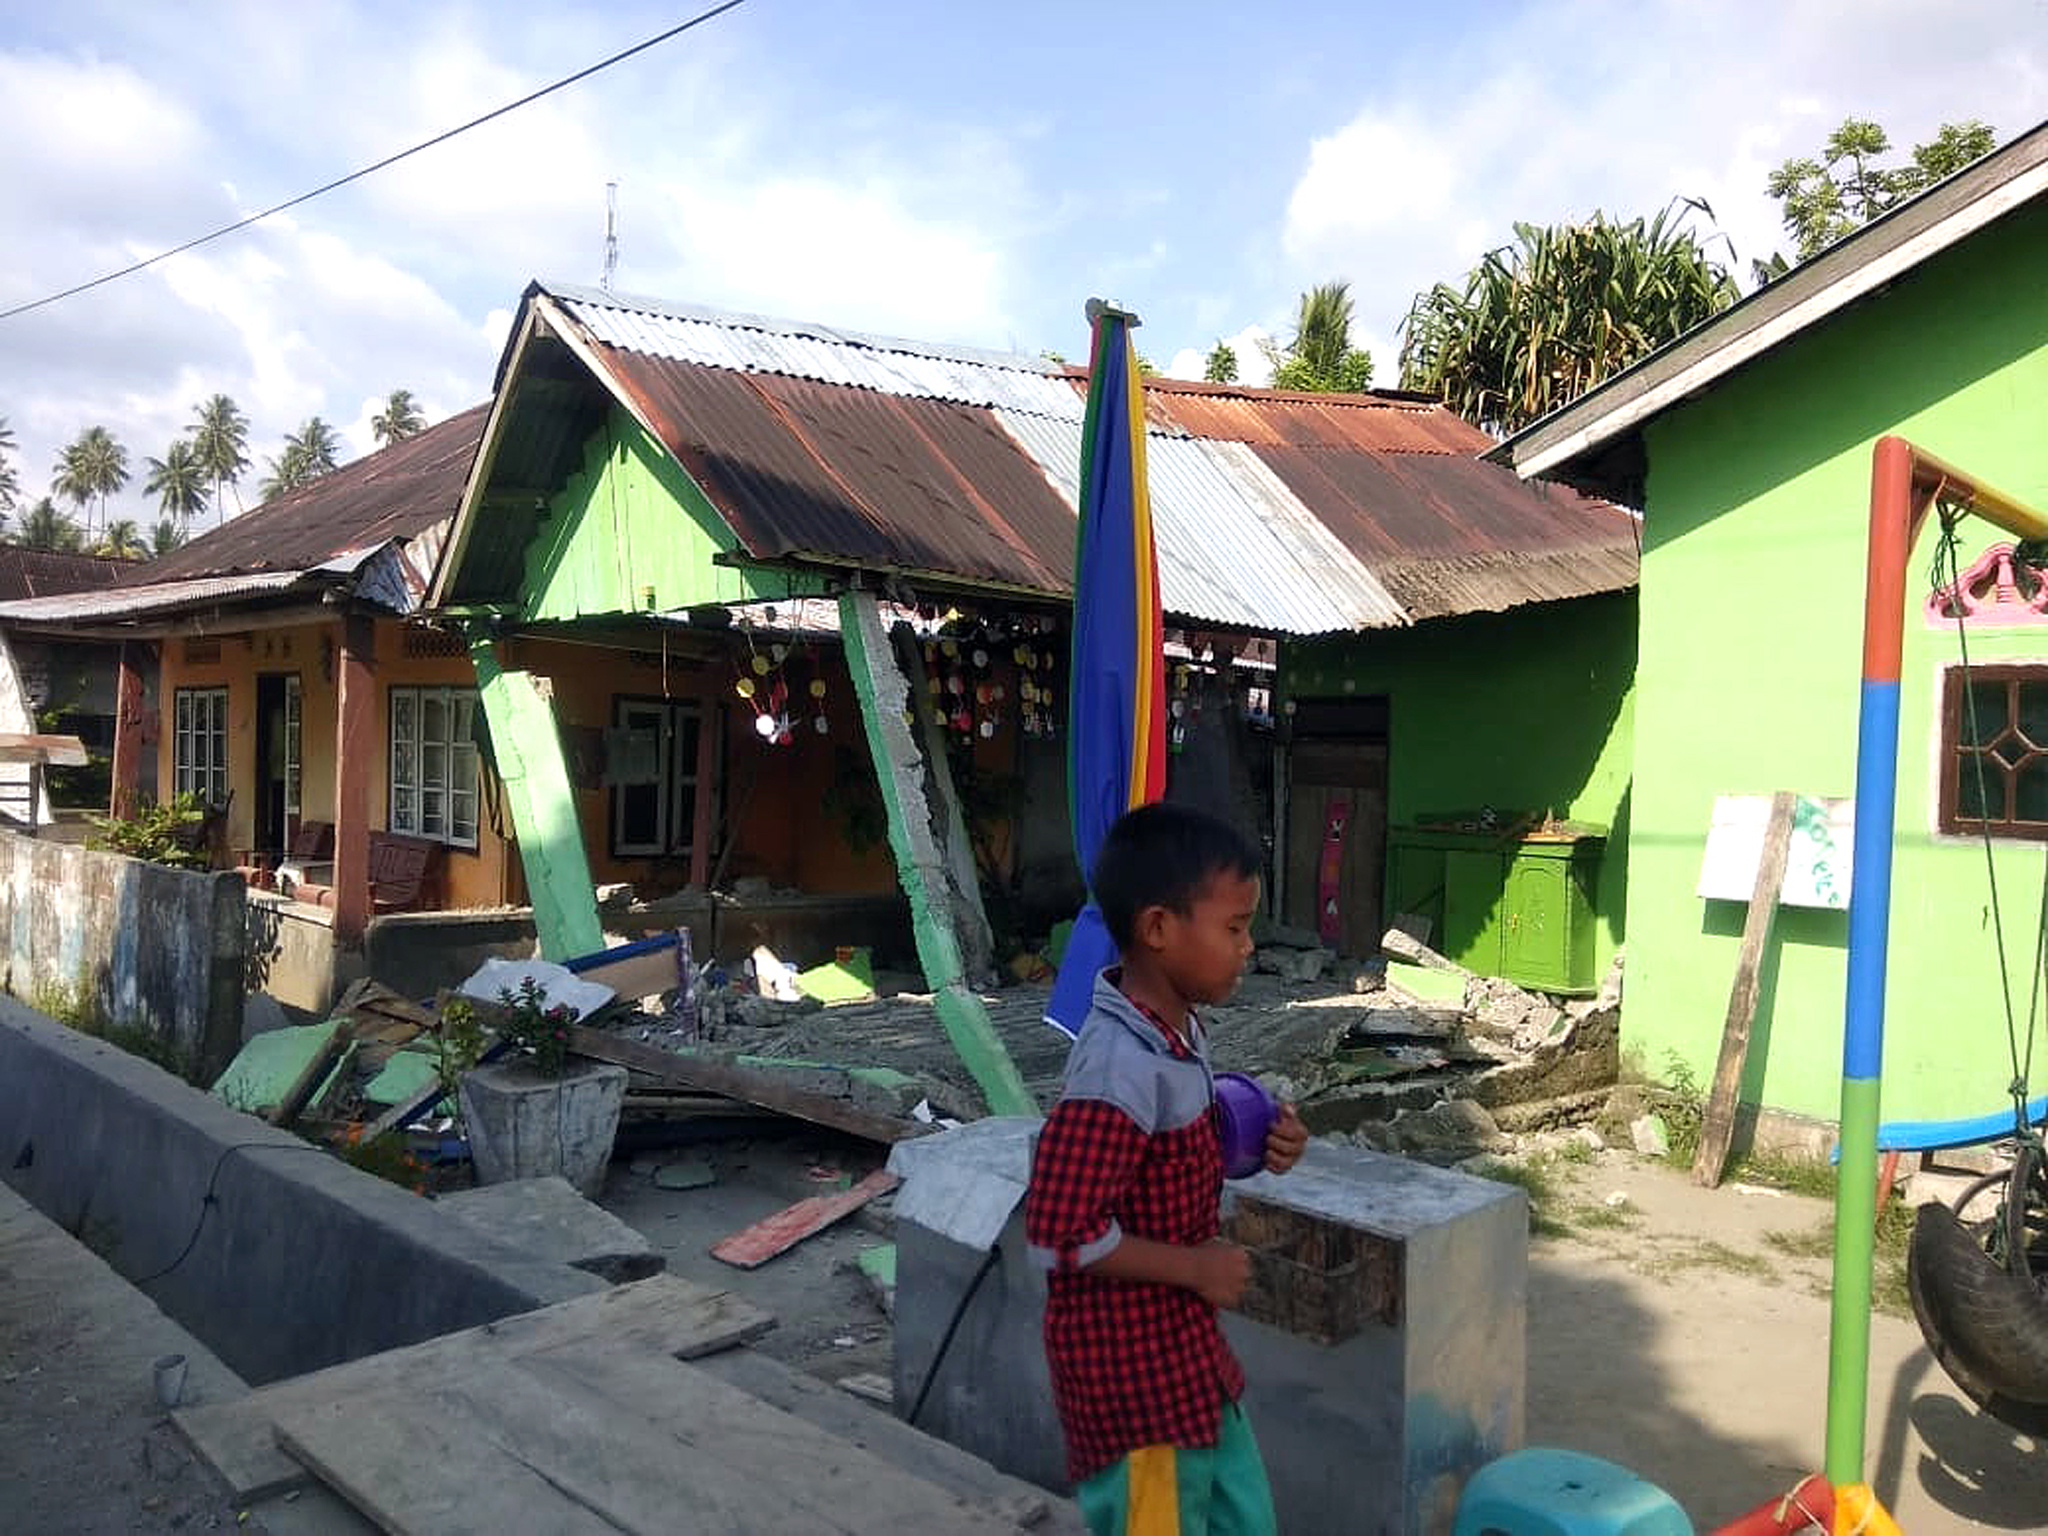 epa07054030 A handout photo made available by the Indonesian National Board for Disaster Management (BNPB) shows a boy walking in front of a collapsed house after a 6.1 magnitude earthquake that hit in Donggala, Central Sulawesi, Indonesia, 28 September 2018. According to BNPB, a series of powerful earthquakes has hit Central Sulawesi killing at least one person and injuring dozens.  EPA/BNPB HANDOUT -- BEST QUALITY AVAILABLE -- HANDOUT EDITORIAL USE ONLY/NO SALES